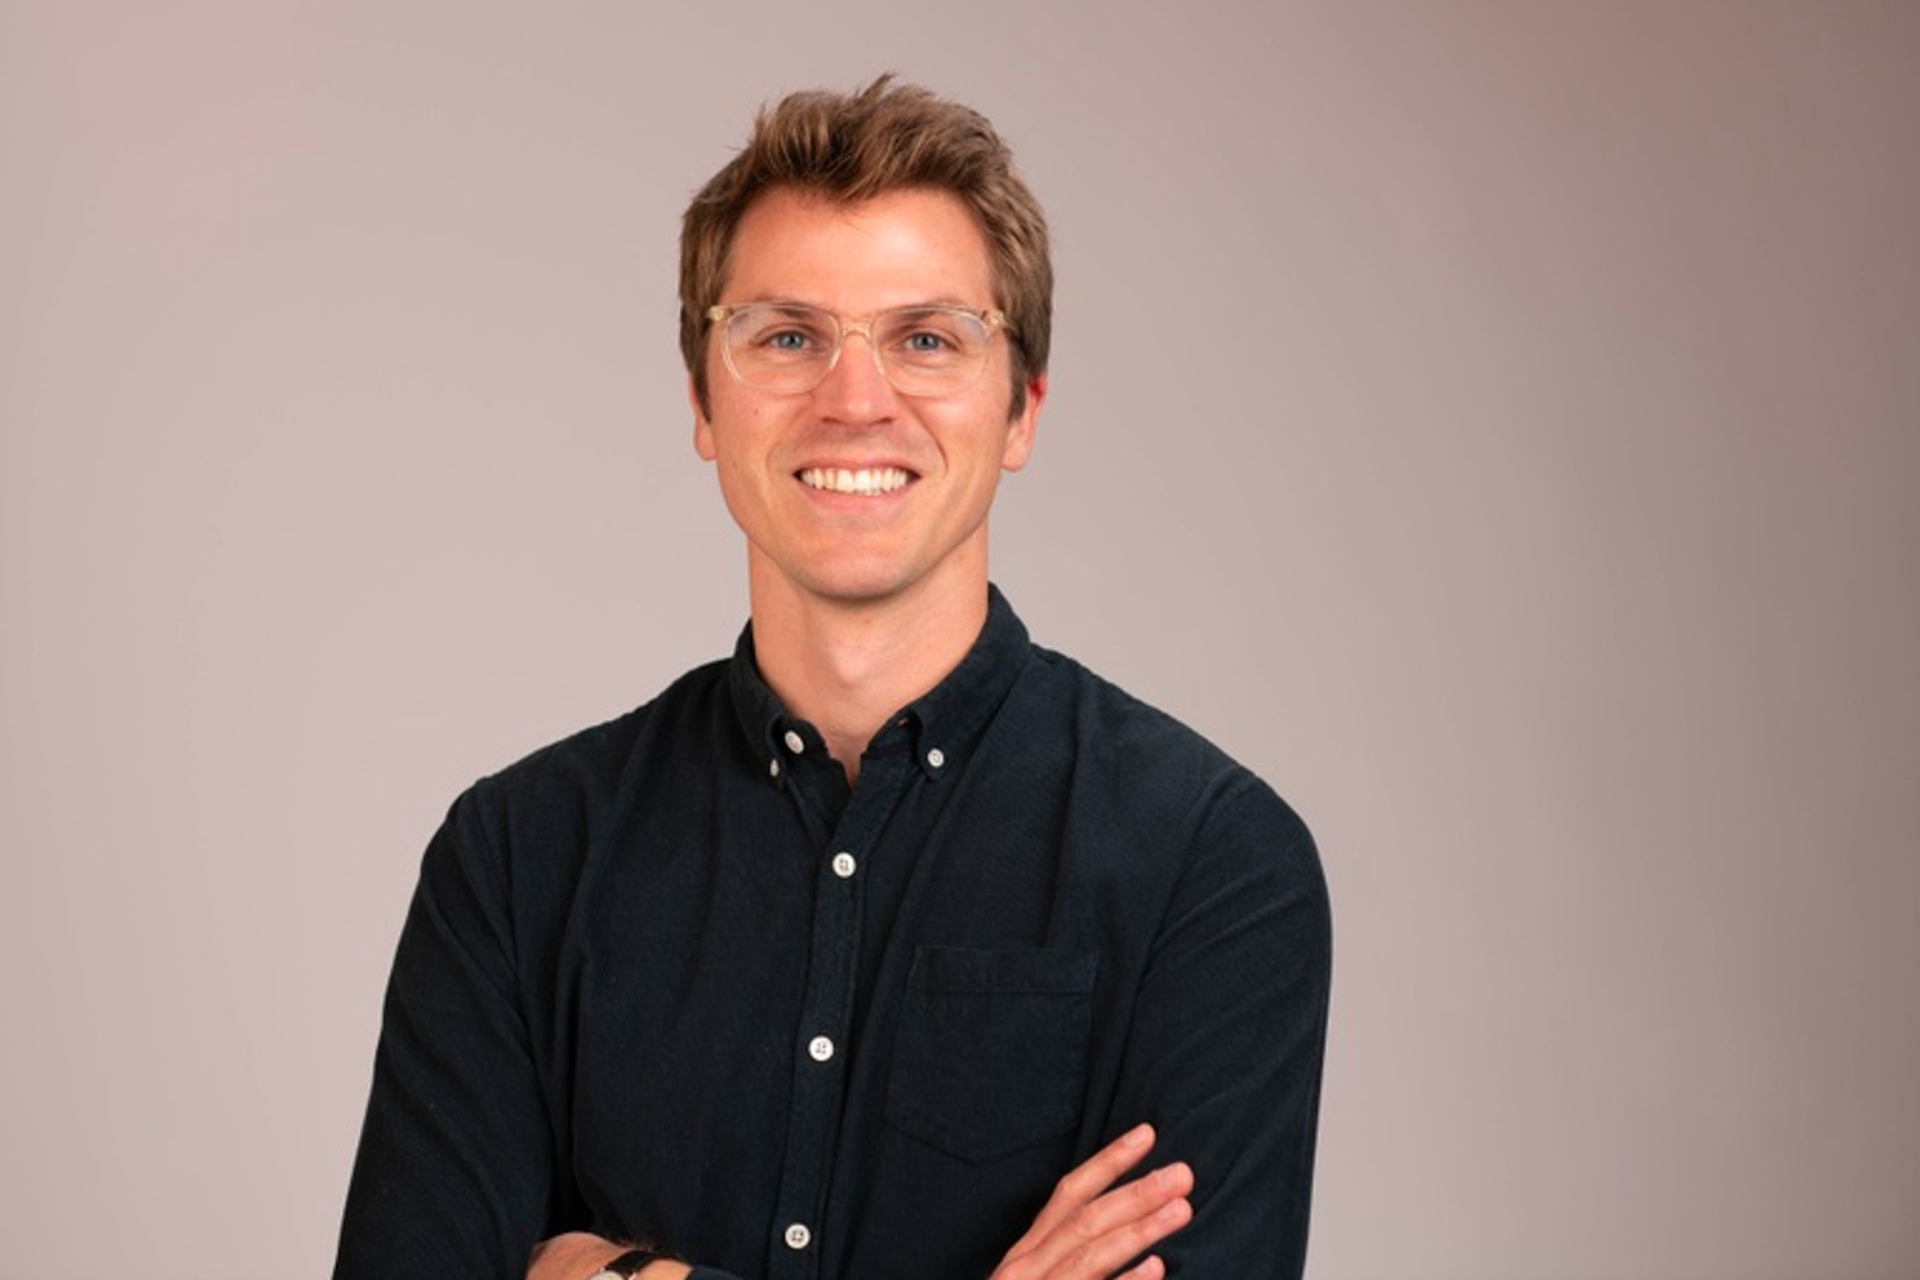 Photo of Andrew Ofstad, wearing glasses in a dark blue shirt against a gray background